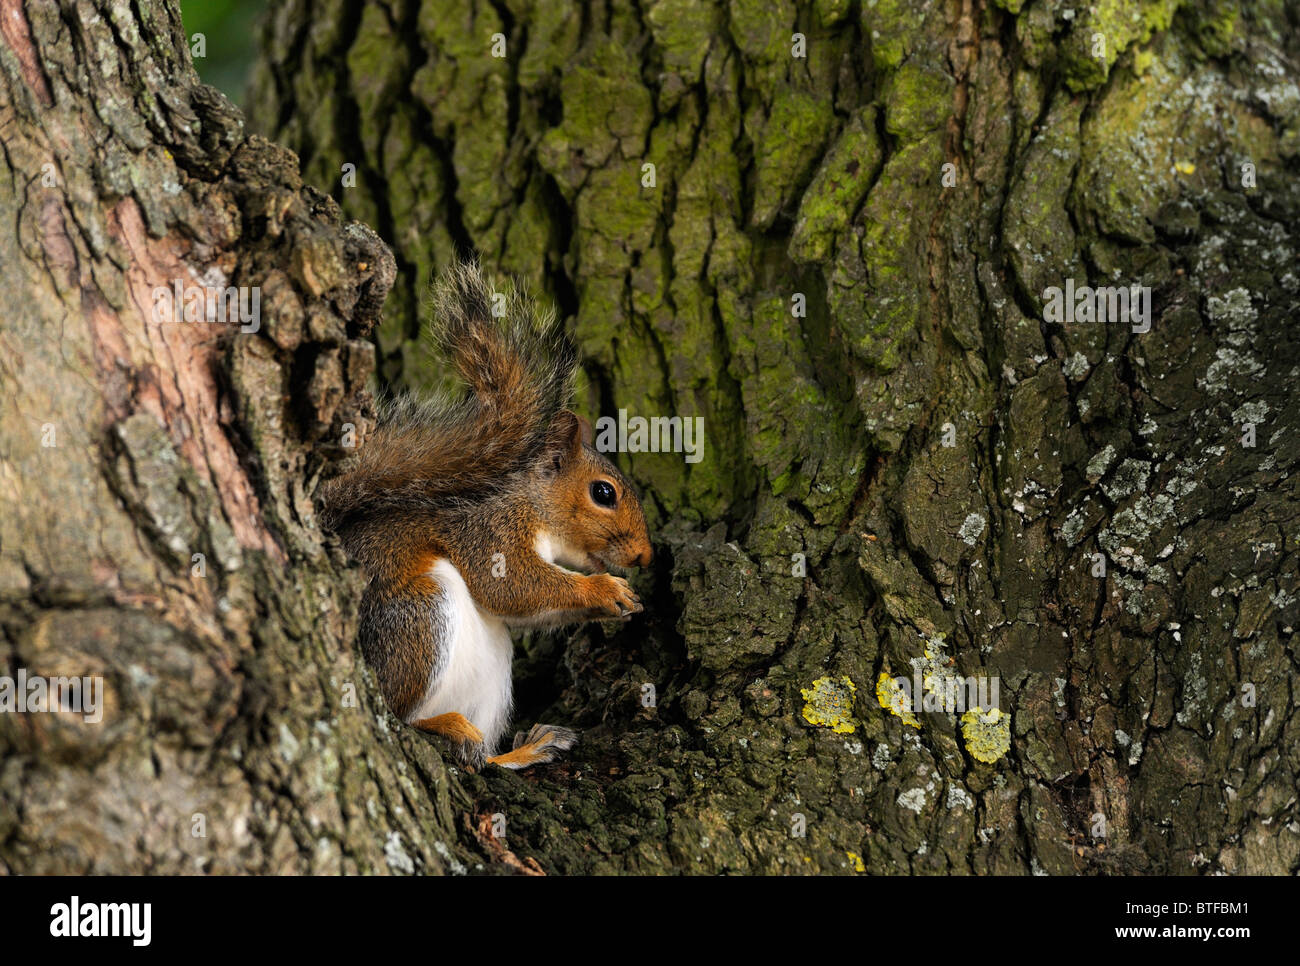 squirrel eating nut sitting in a tree Stock Photo